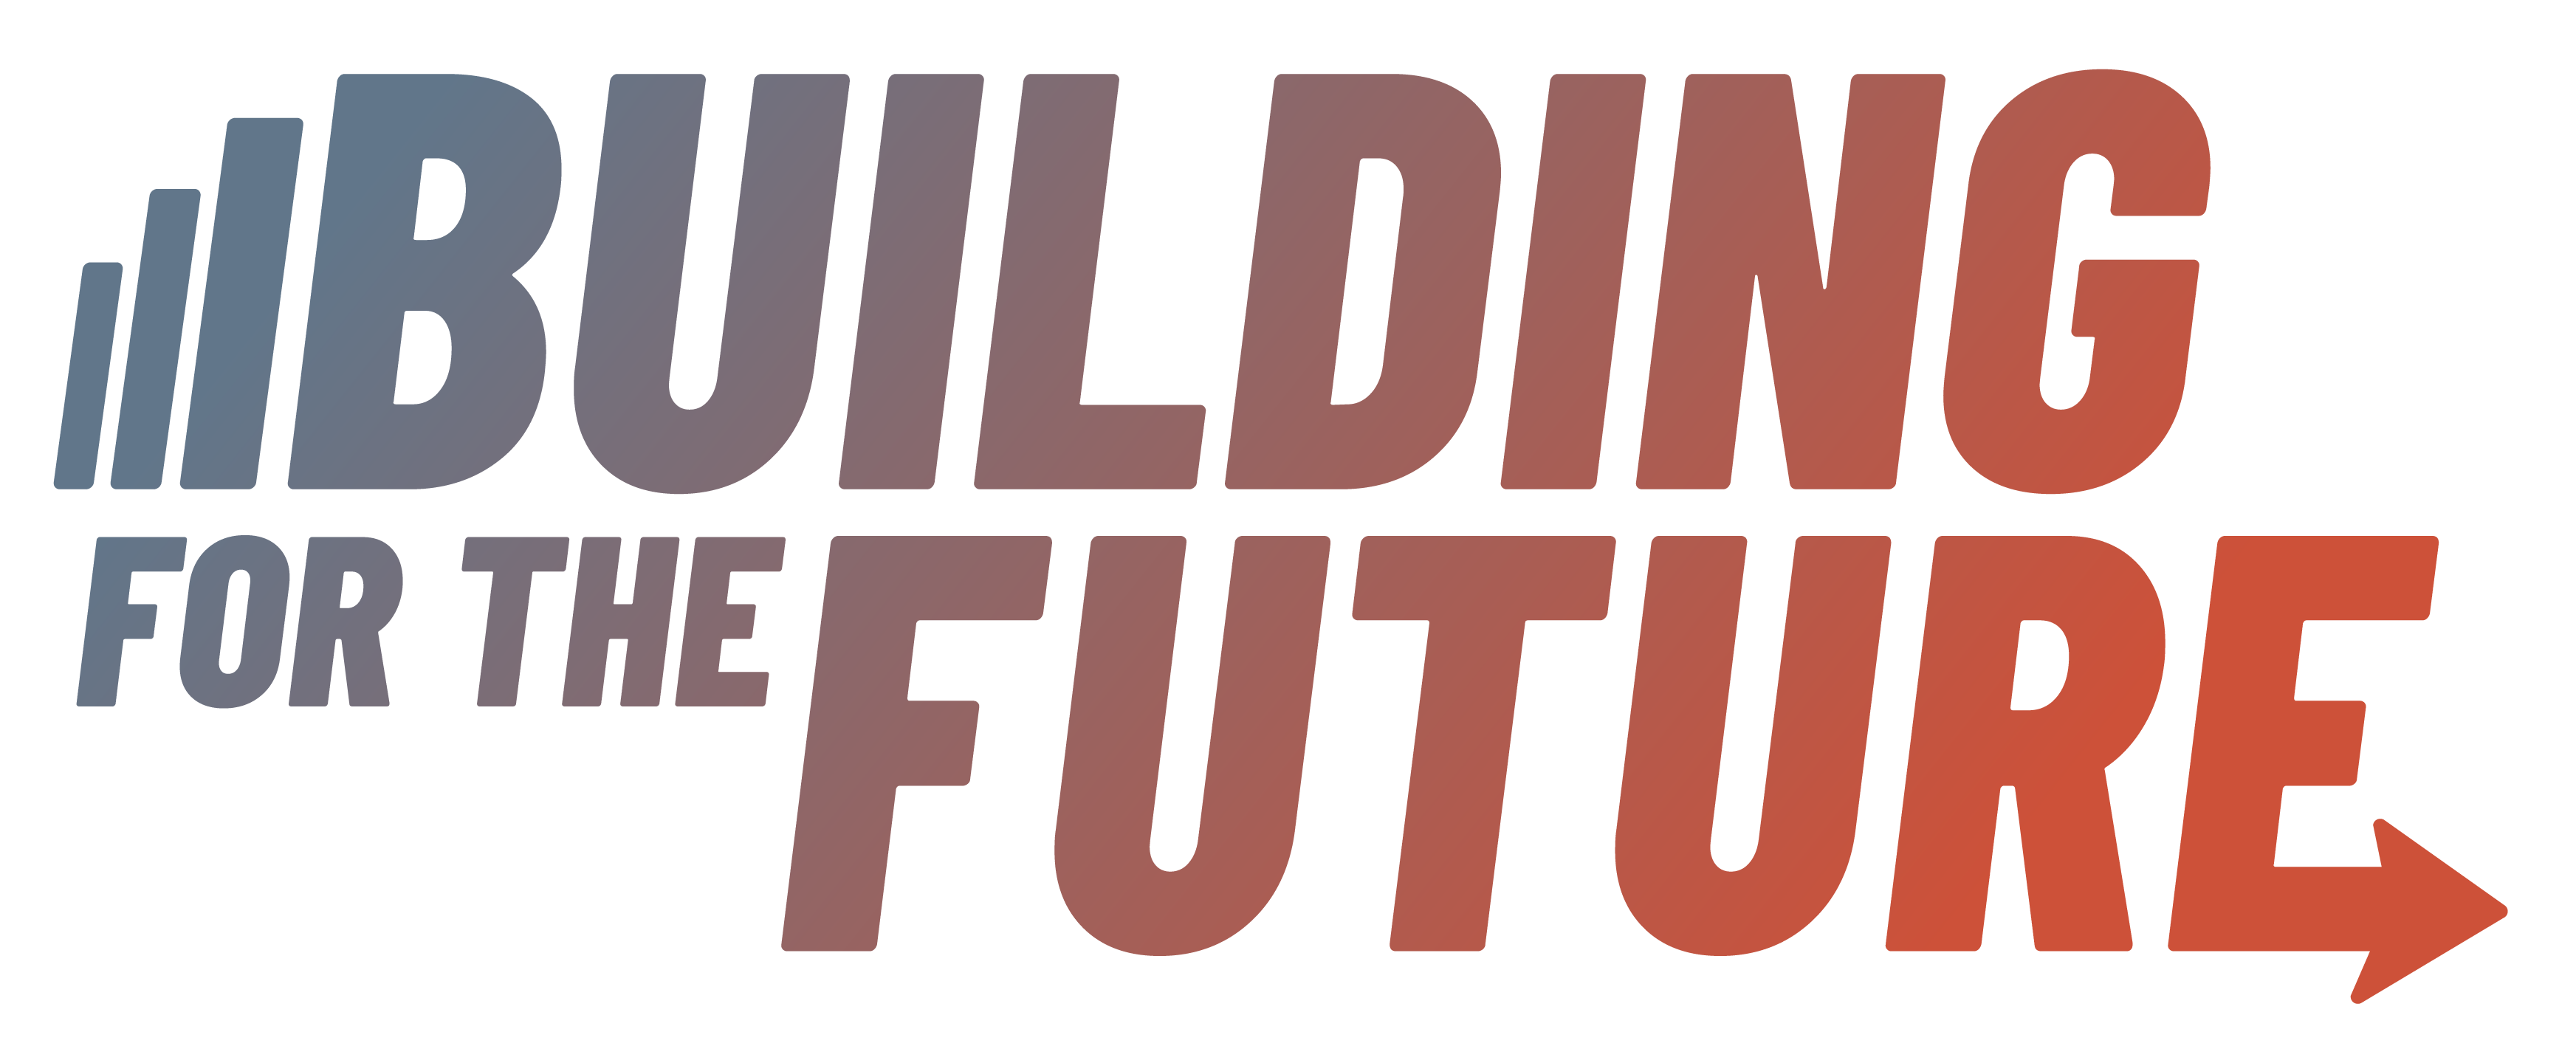 Building for the Future